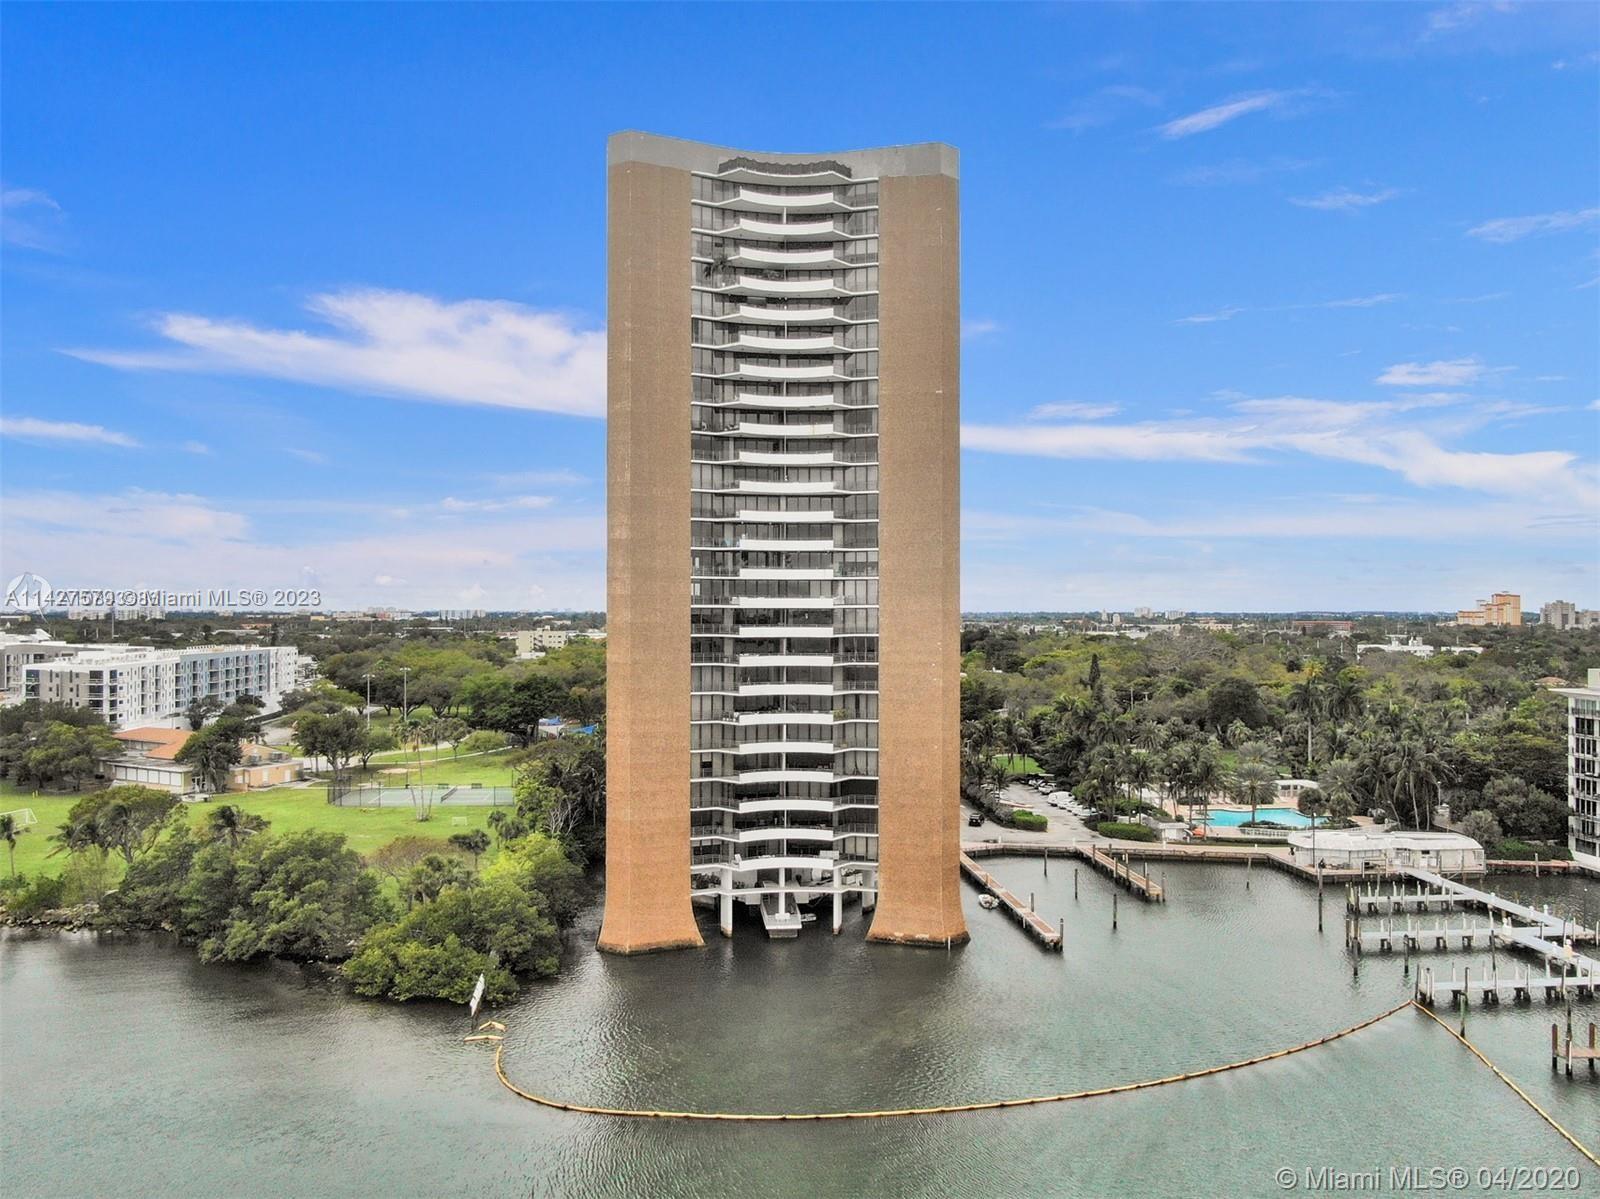 Beautiful 2,957 sq' 3 bedroom, 3.5 bathroom condo in the majestic Palm Bay Towers. Move in condition, nicely renovated, Flow-through balconies with direct bay and city of Miami views.  Amenities include a heated swimming pool, tennis court, fitness center, valet parking, gated community, front desk service and a marina (currently collapsed). 2 Parking spaces are assigned. Minutes from, The Design district, Wynwood, S Beach and Downtown. See Docs for rental restrictions